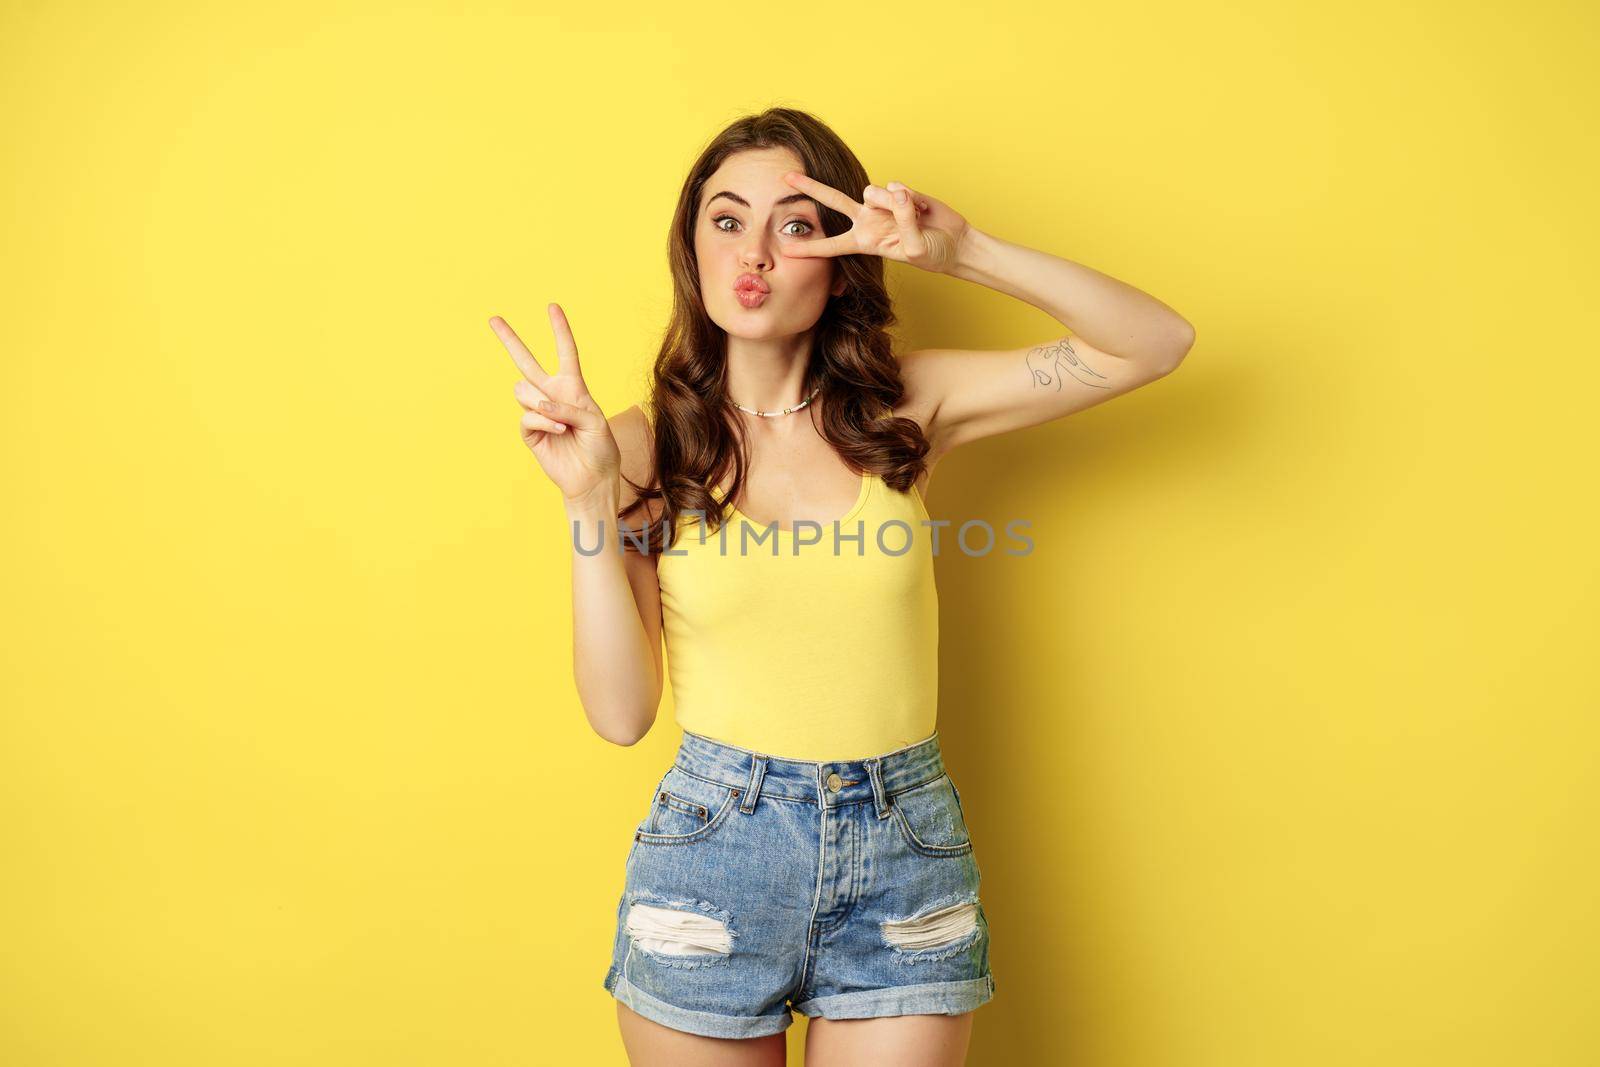 Positive girl, female model showing peace, v-sign gesture and smiling, standing in tank top and denim shorts, yellow background.